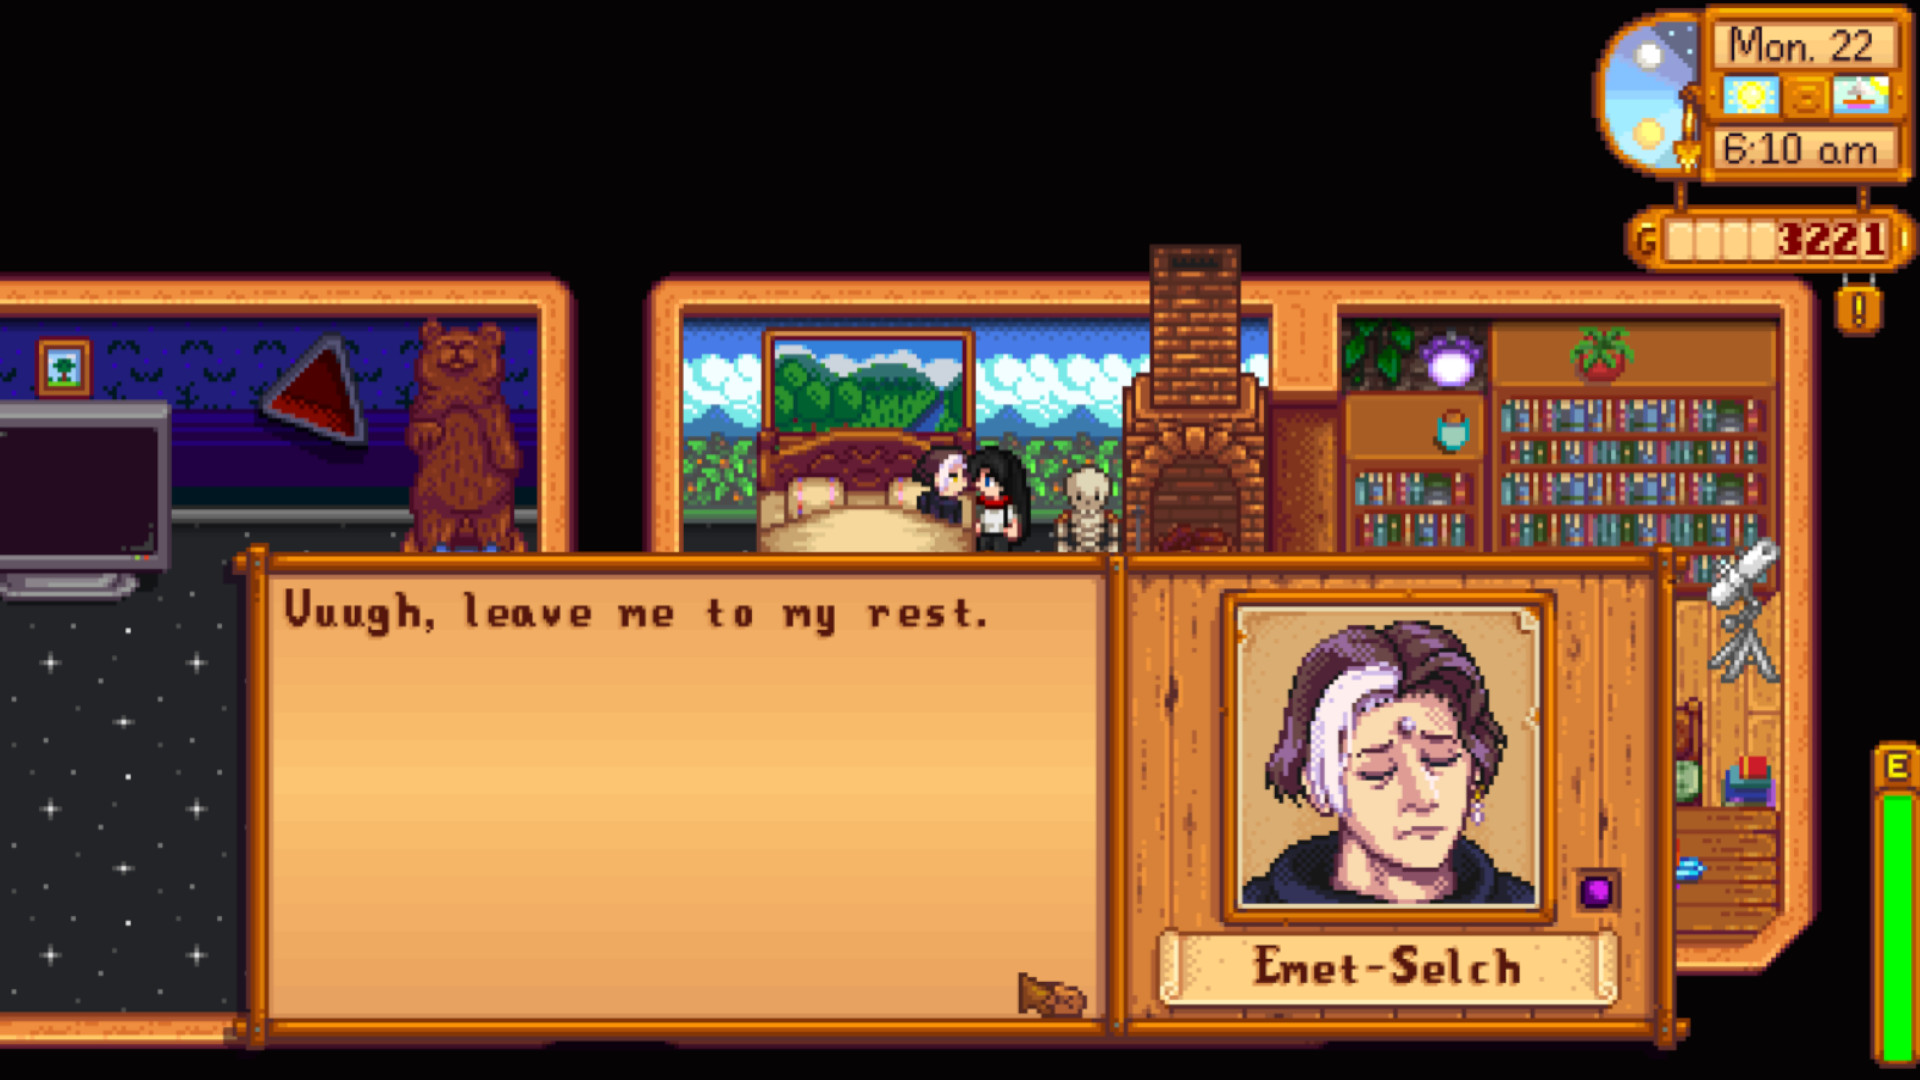 You can now marry FFXIV’s Emet-Selch in Stardew Valley